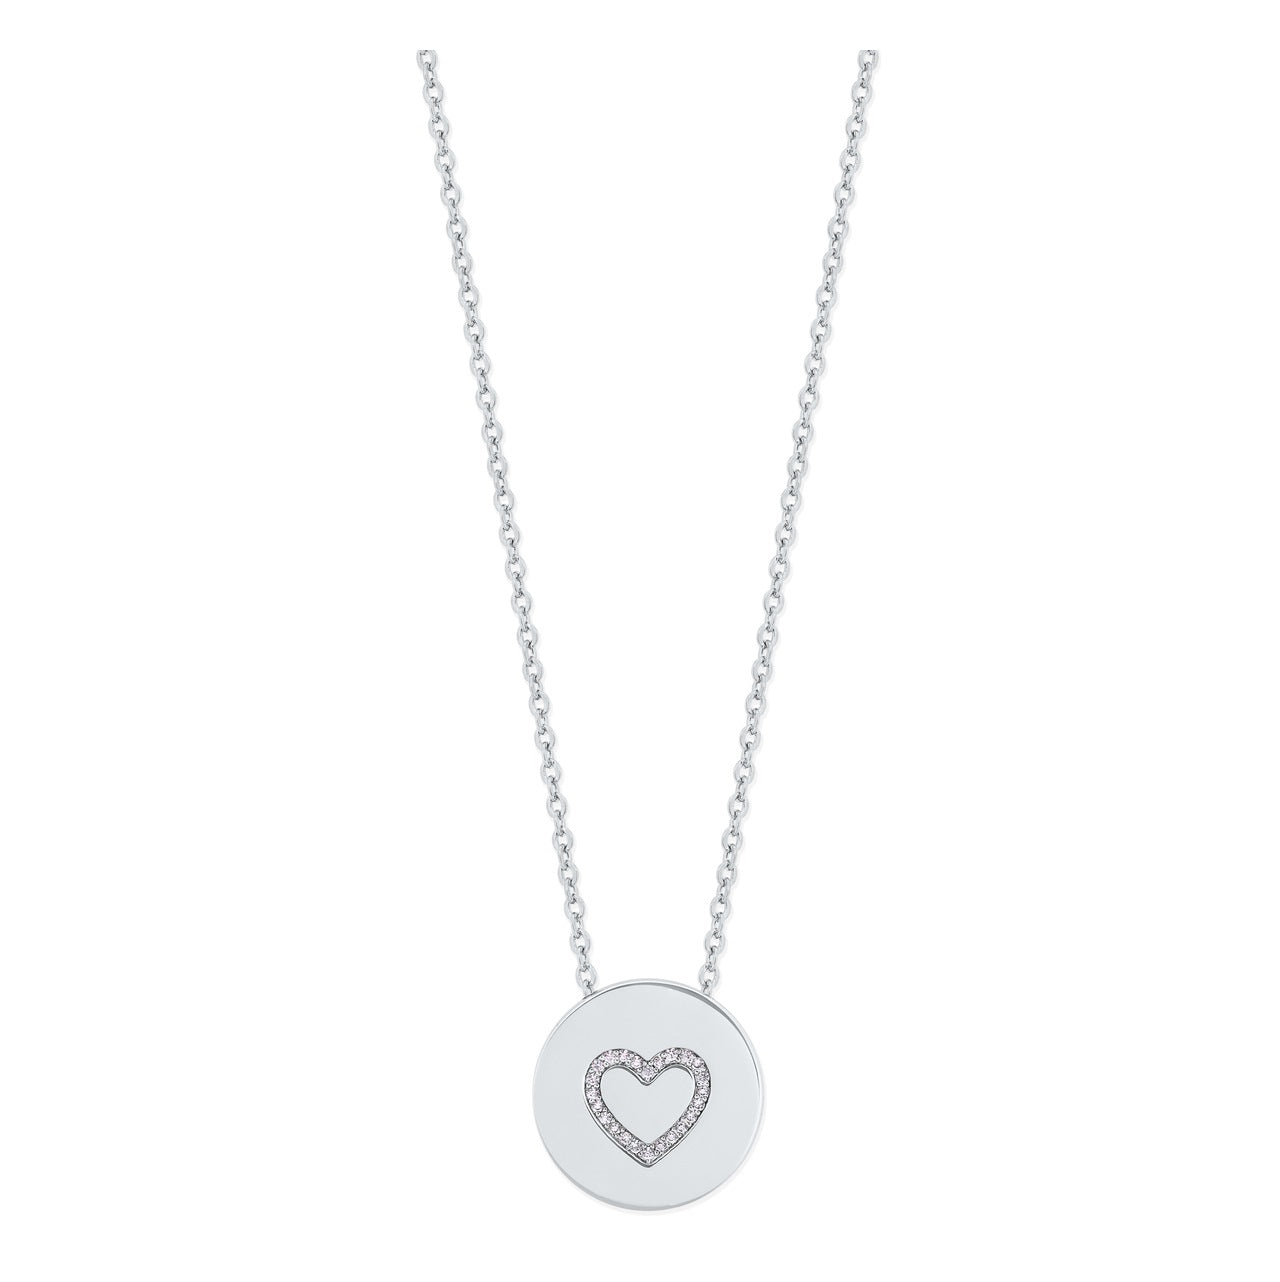 Tipperary Crystal Heart Outline Heart Pendant - Silver